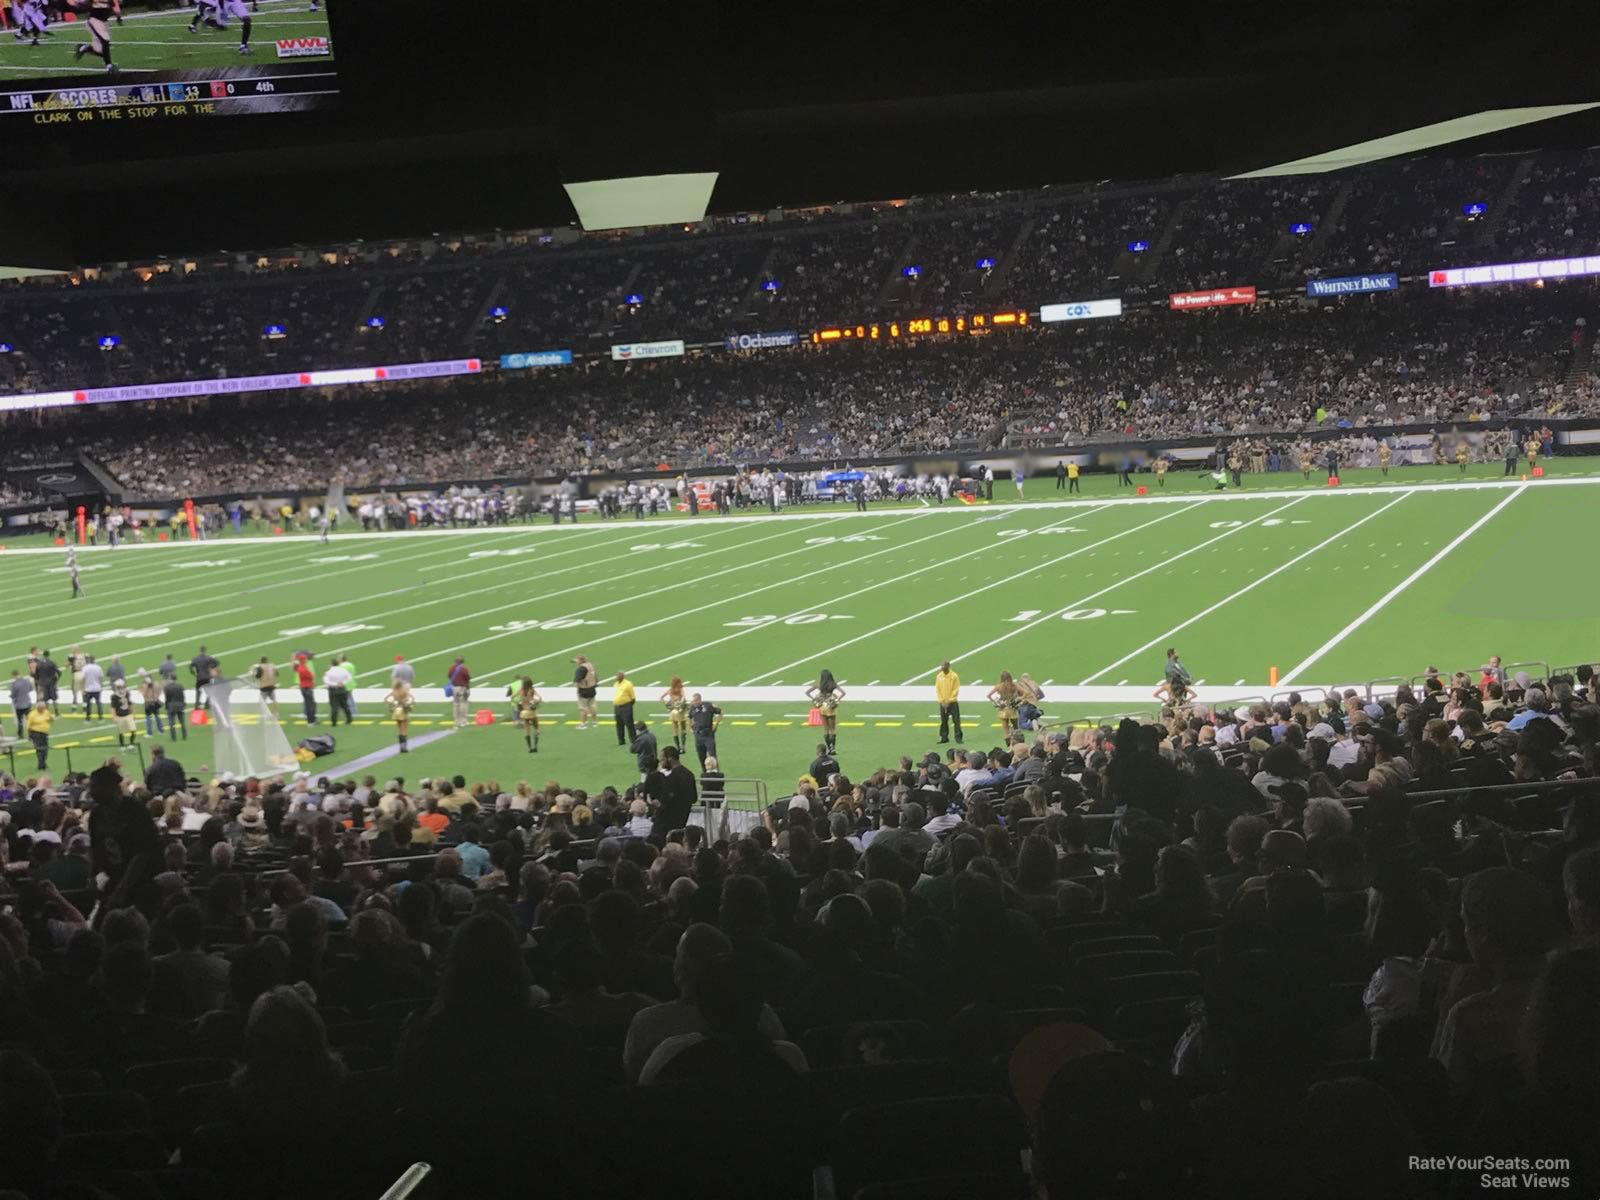 section 137, row 23 seat view  for football - caesars superdome